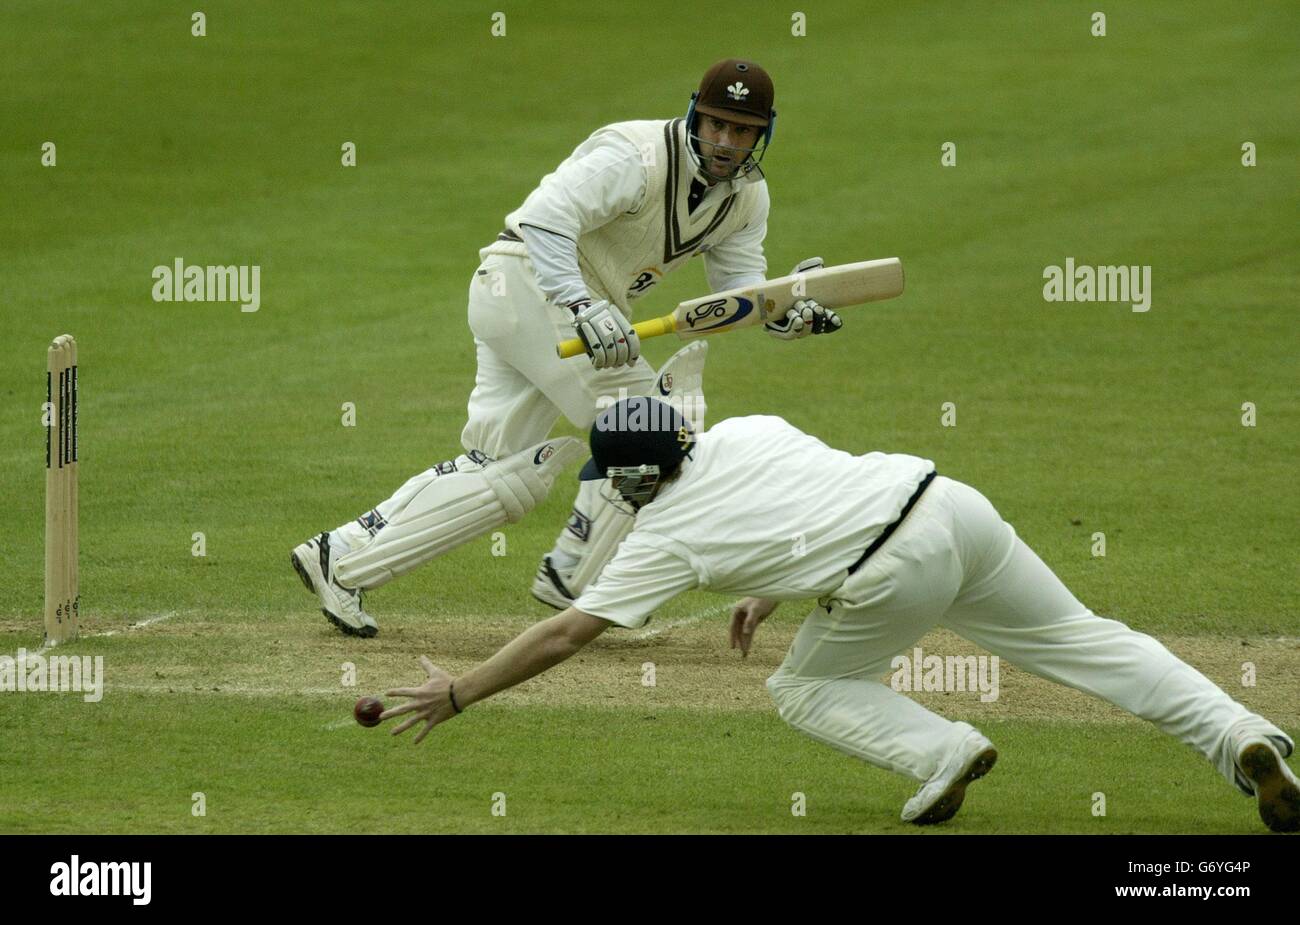 Surrey's Graham Thorpe trys to steer the ball past Warwickshire fielder Ian Bell, on the second day of Frizzell County Championship Division One match at Edgbaston, Birmingham. Stock Photo